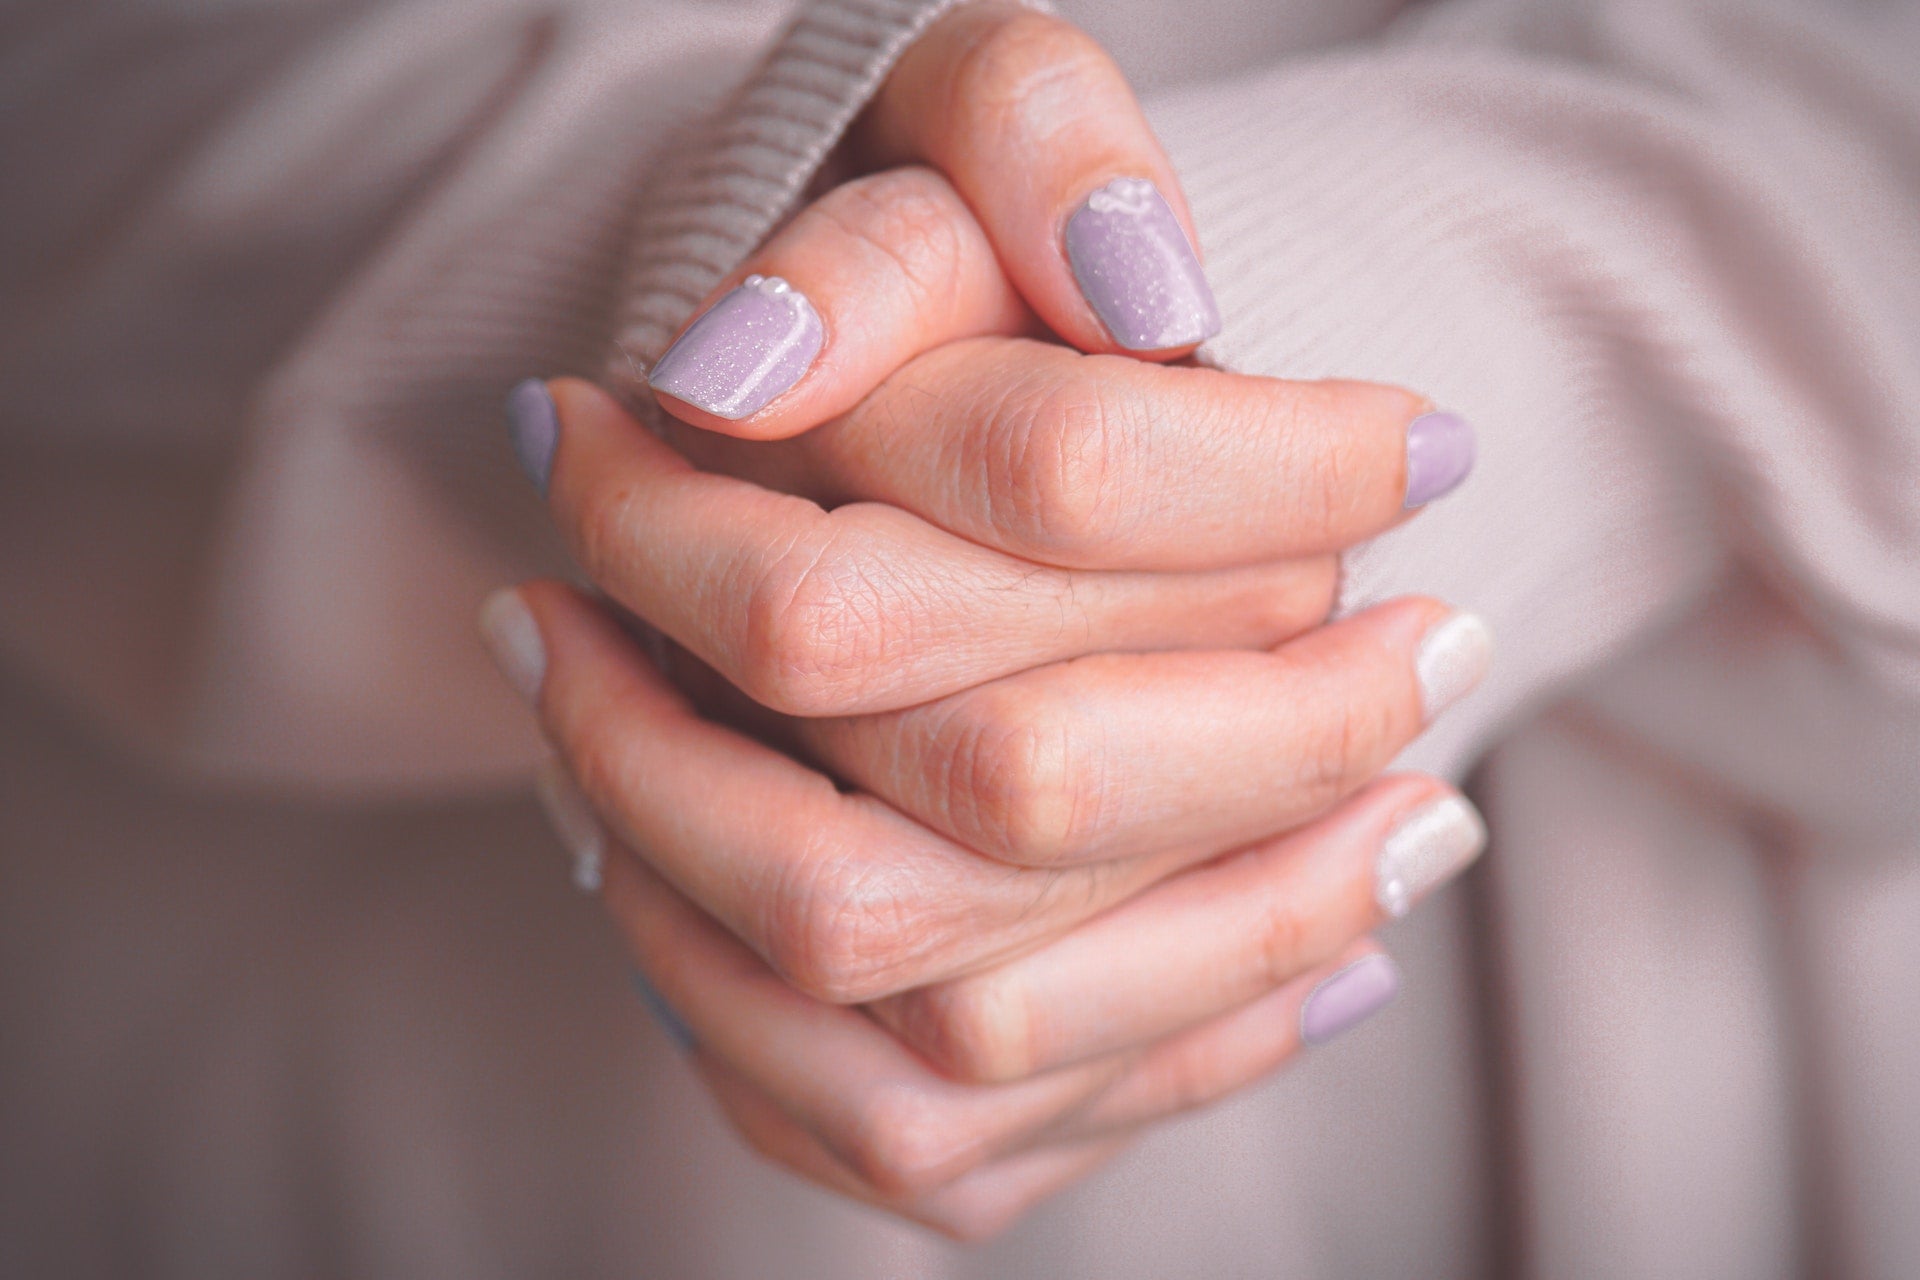 Hands folded showing lavender nails with pearls